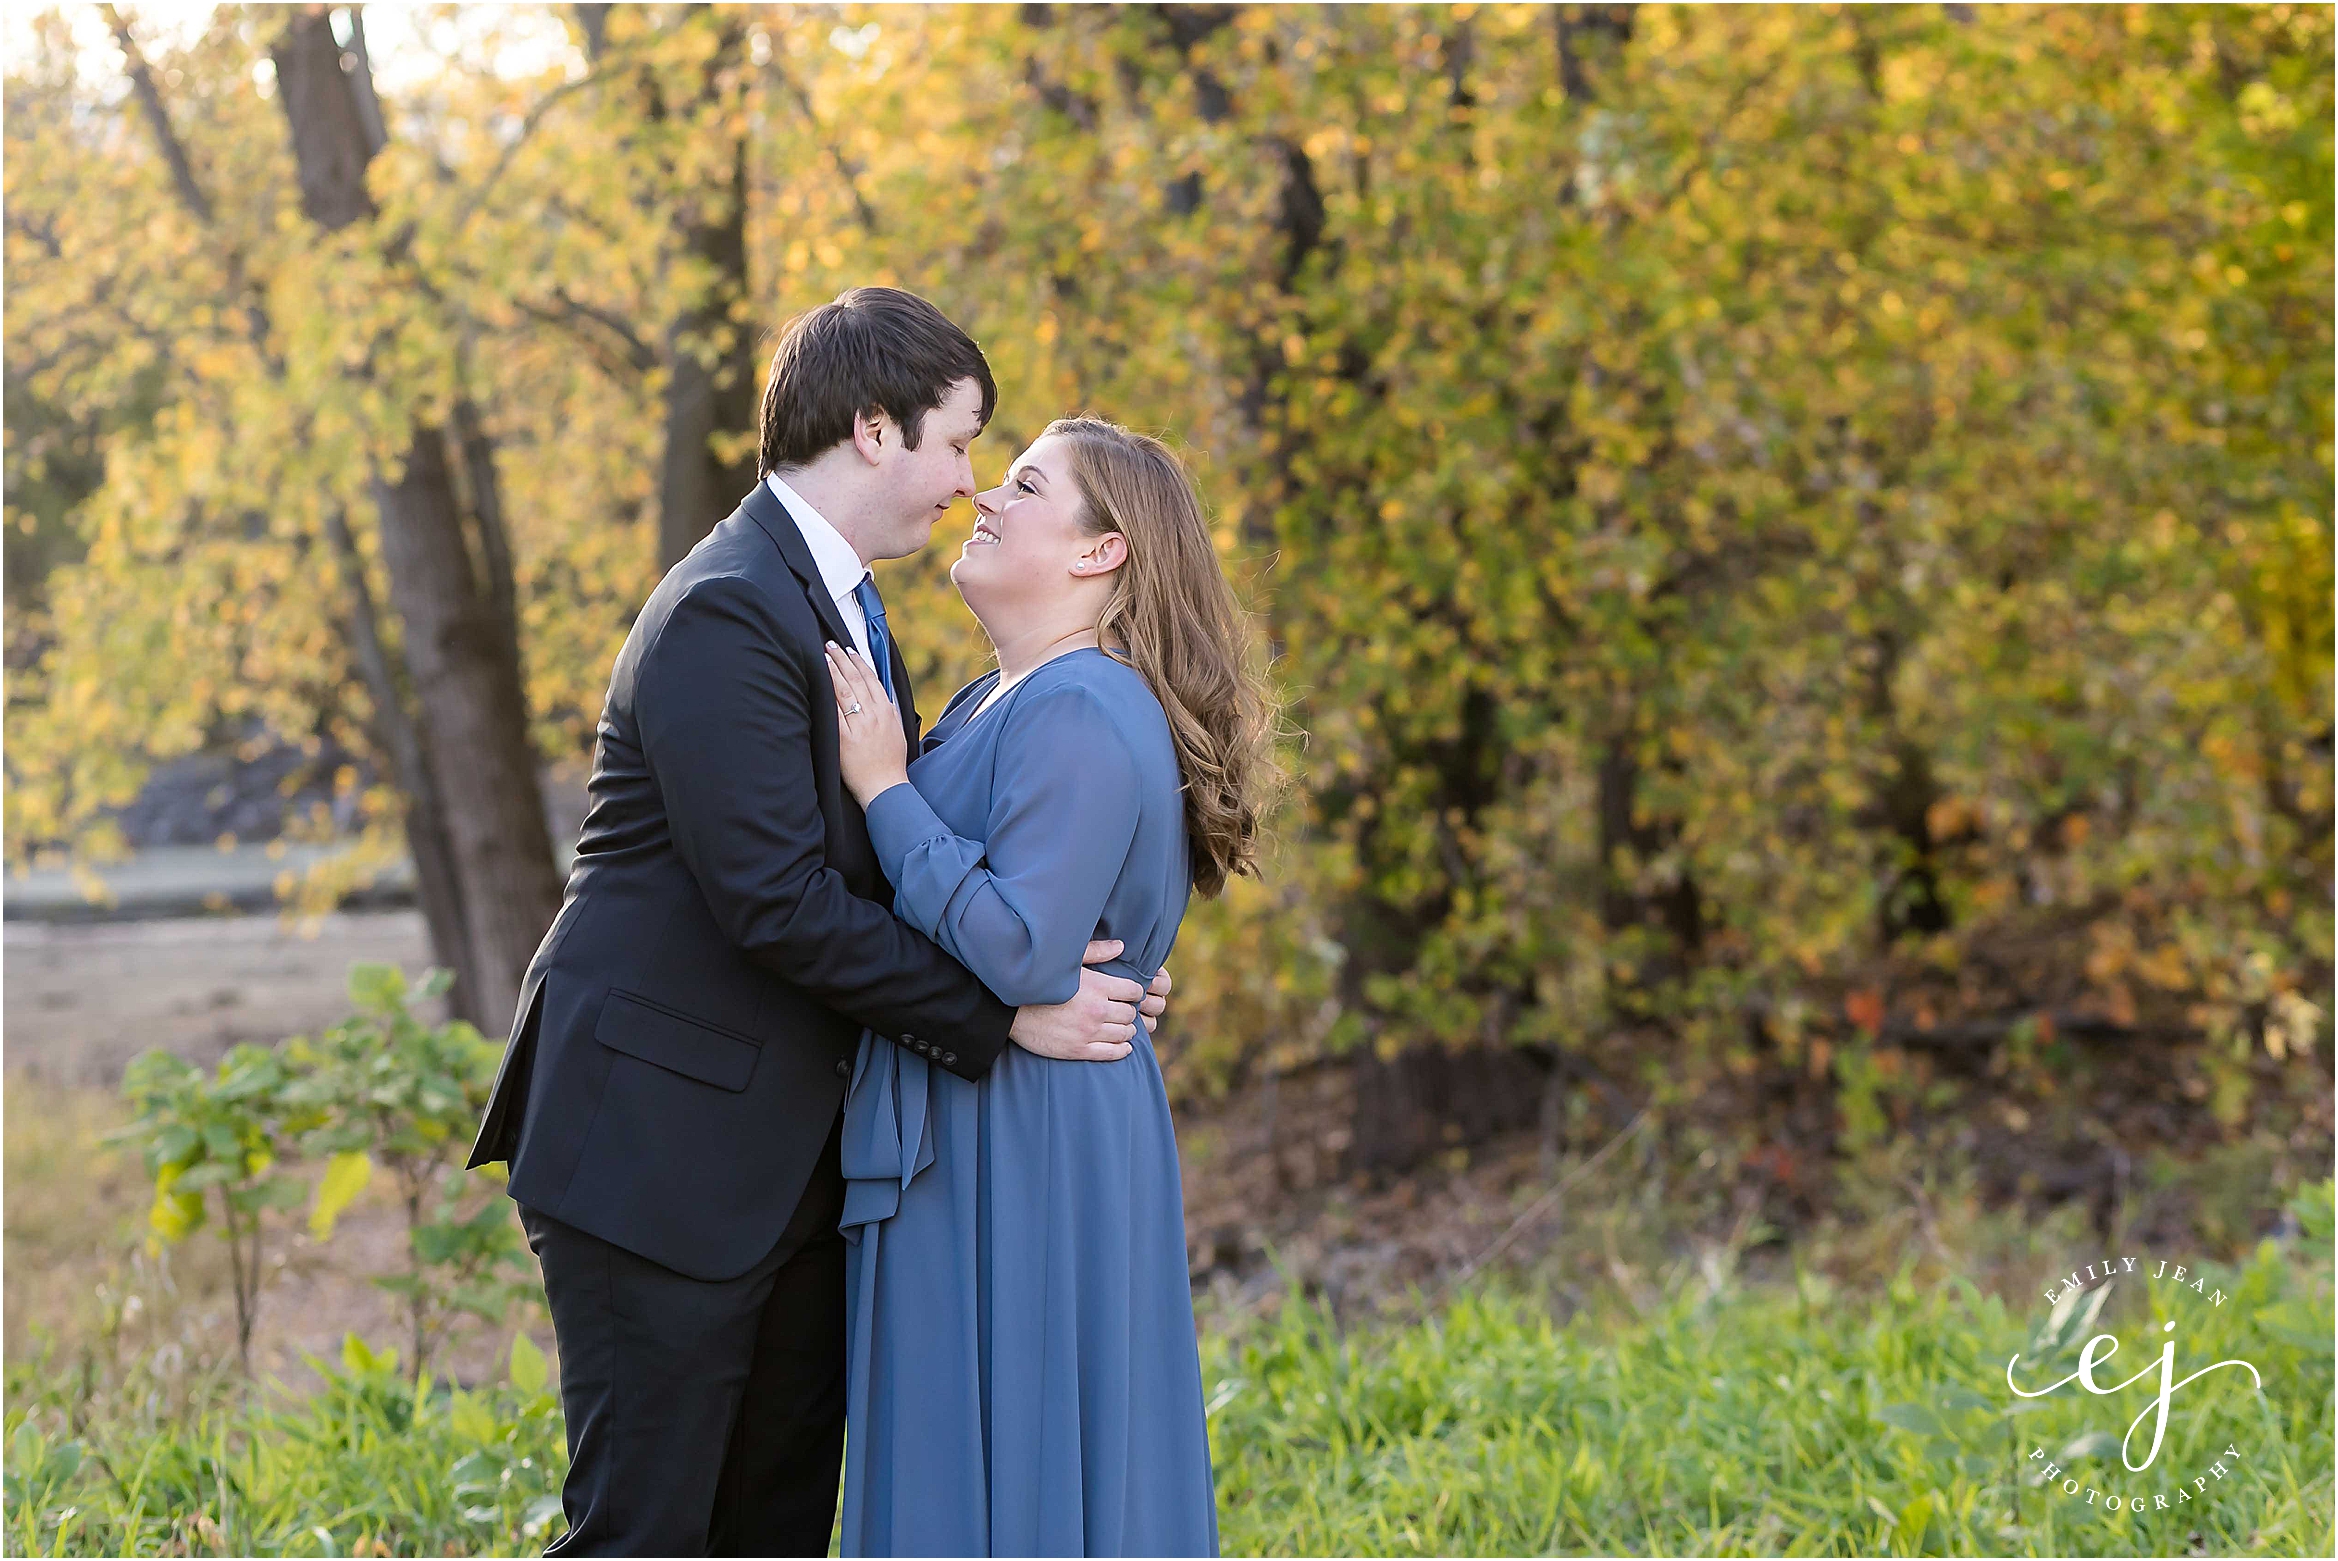 engagement session suit and tie long blue dress dancing in park